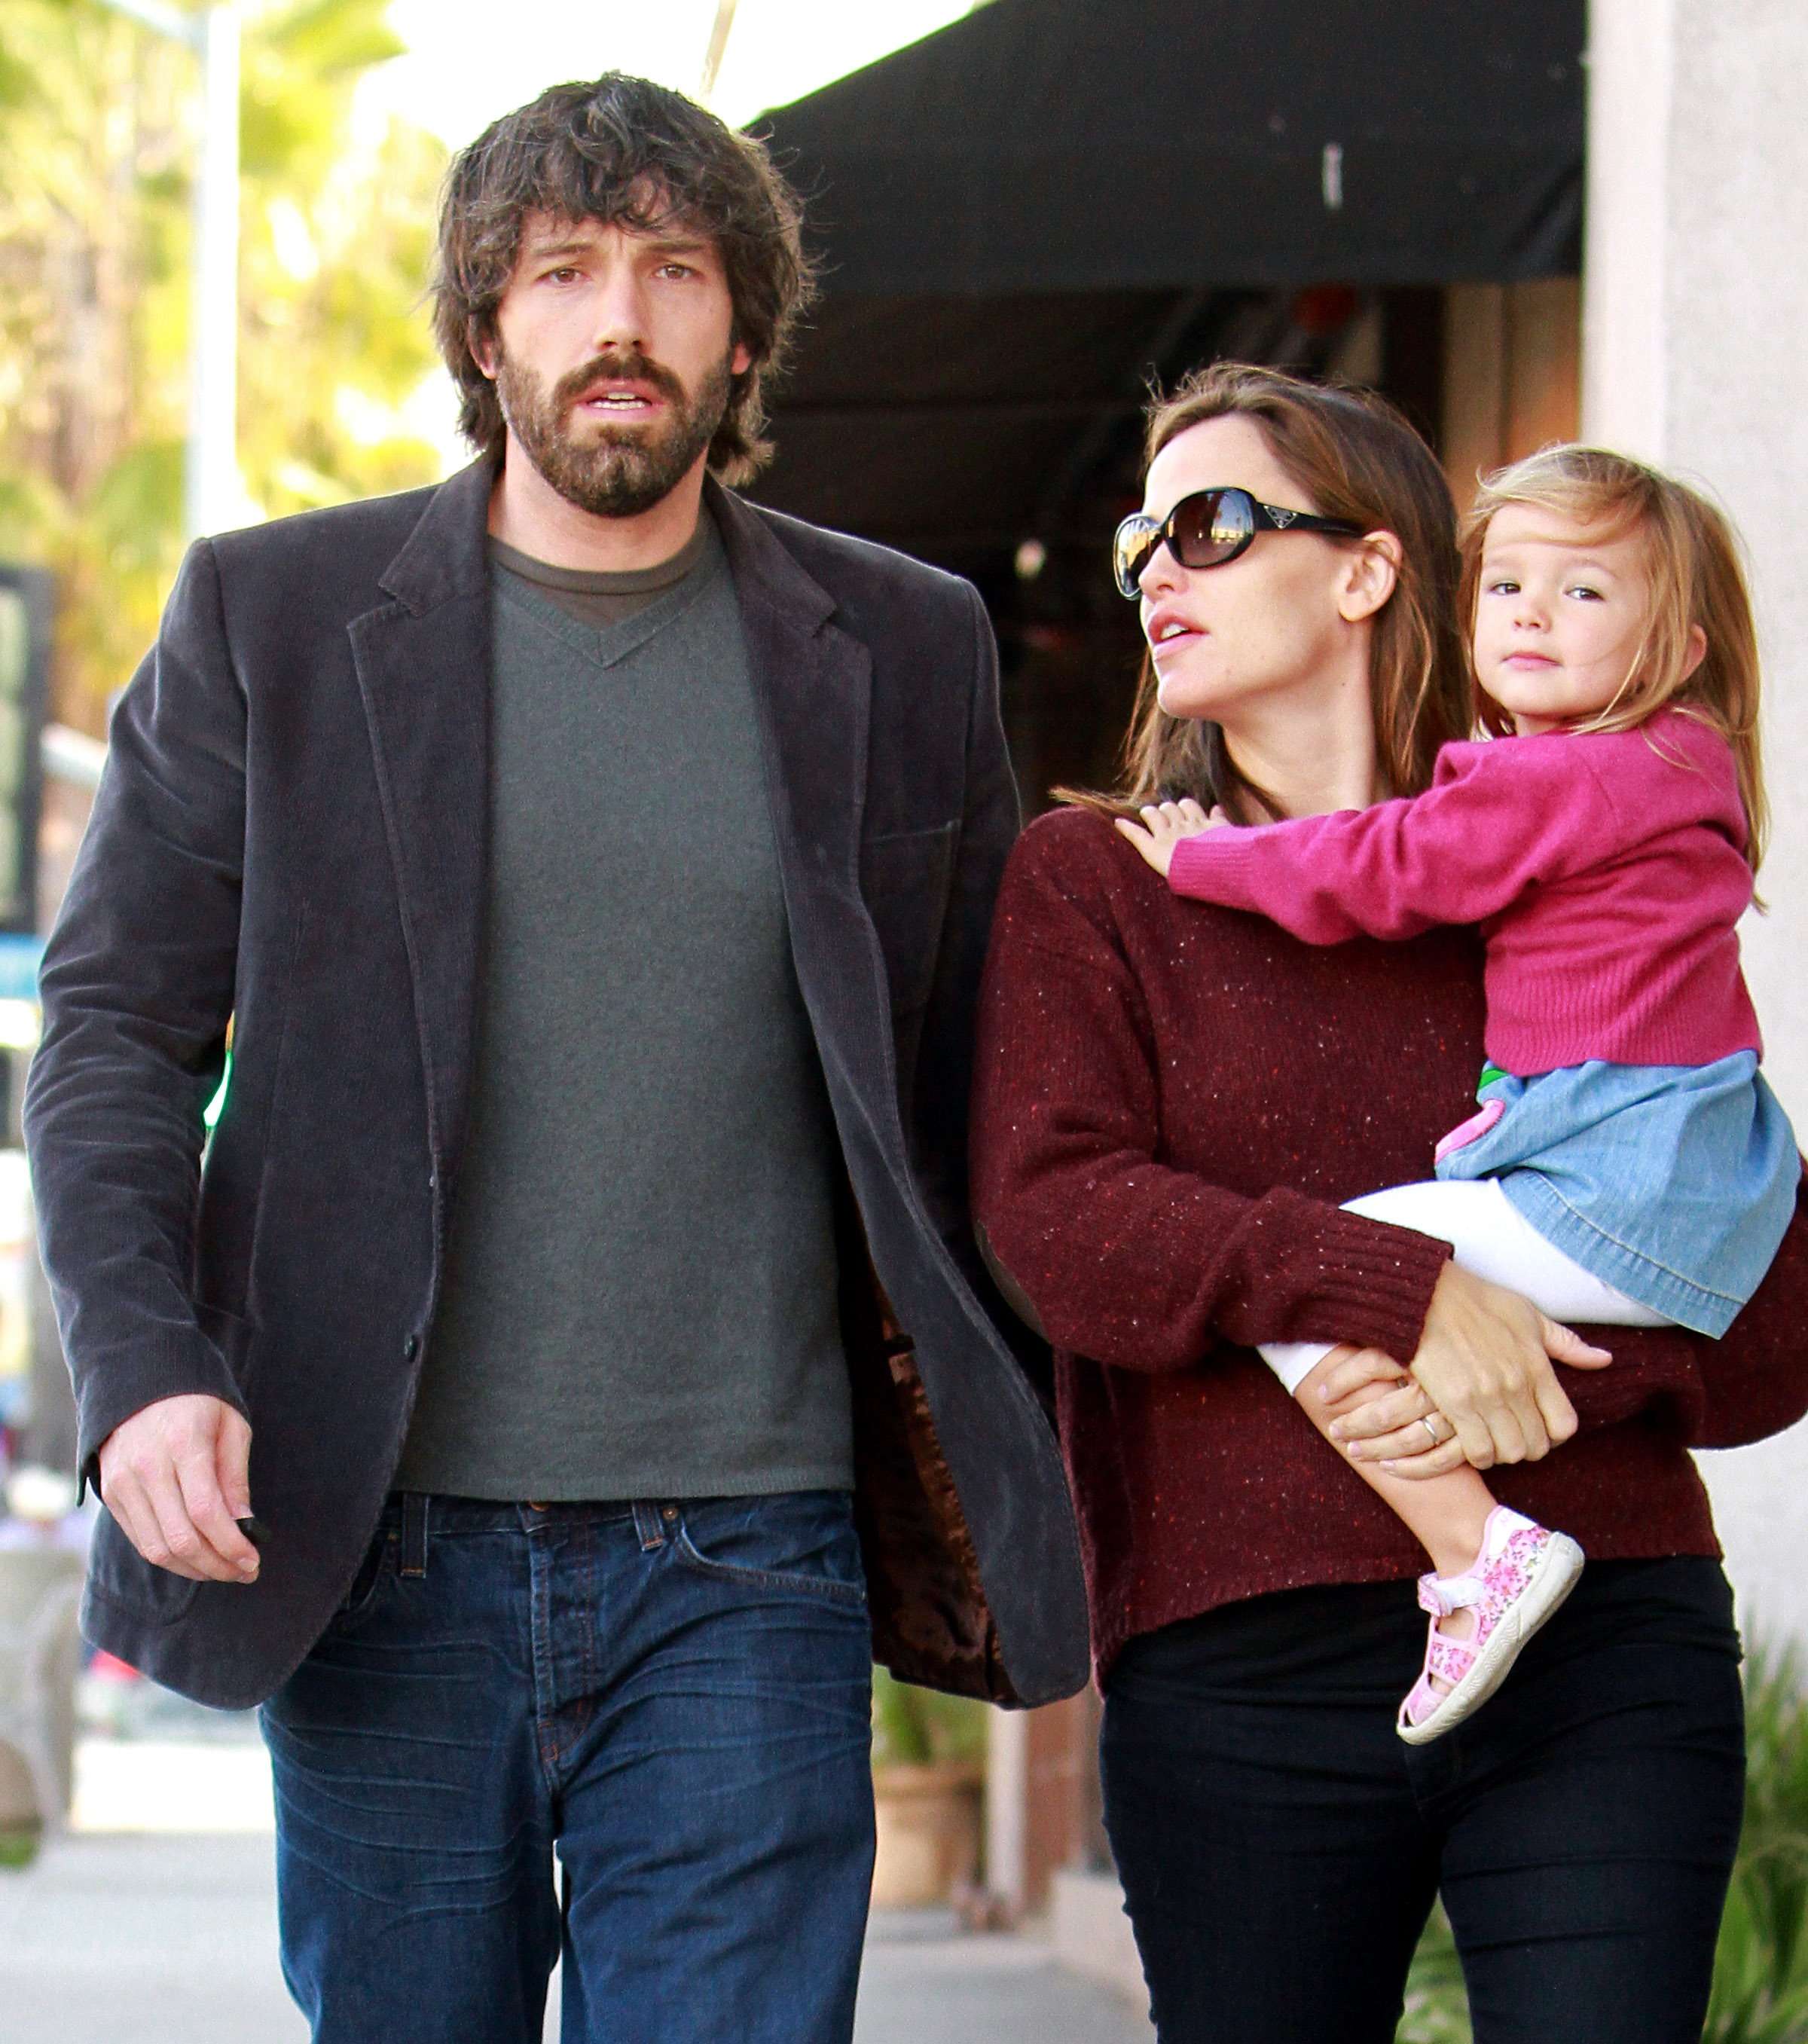 Ben Affleck and Jennifer Garner carry Seraphina Rose as they walk in Santa Monica on October 26, 2011, in Los Angeles, California. | Source: Getty Images